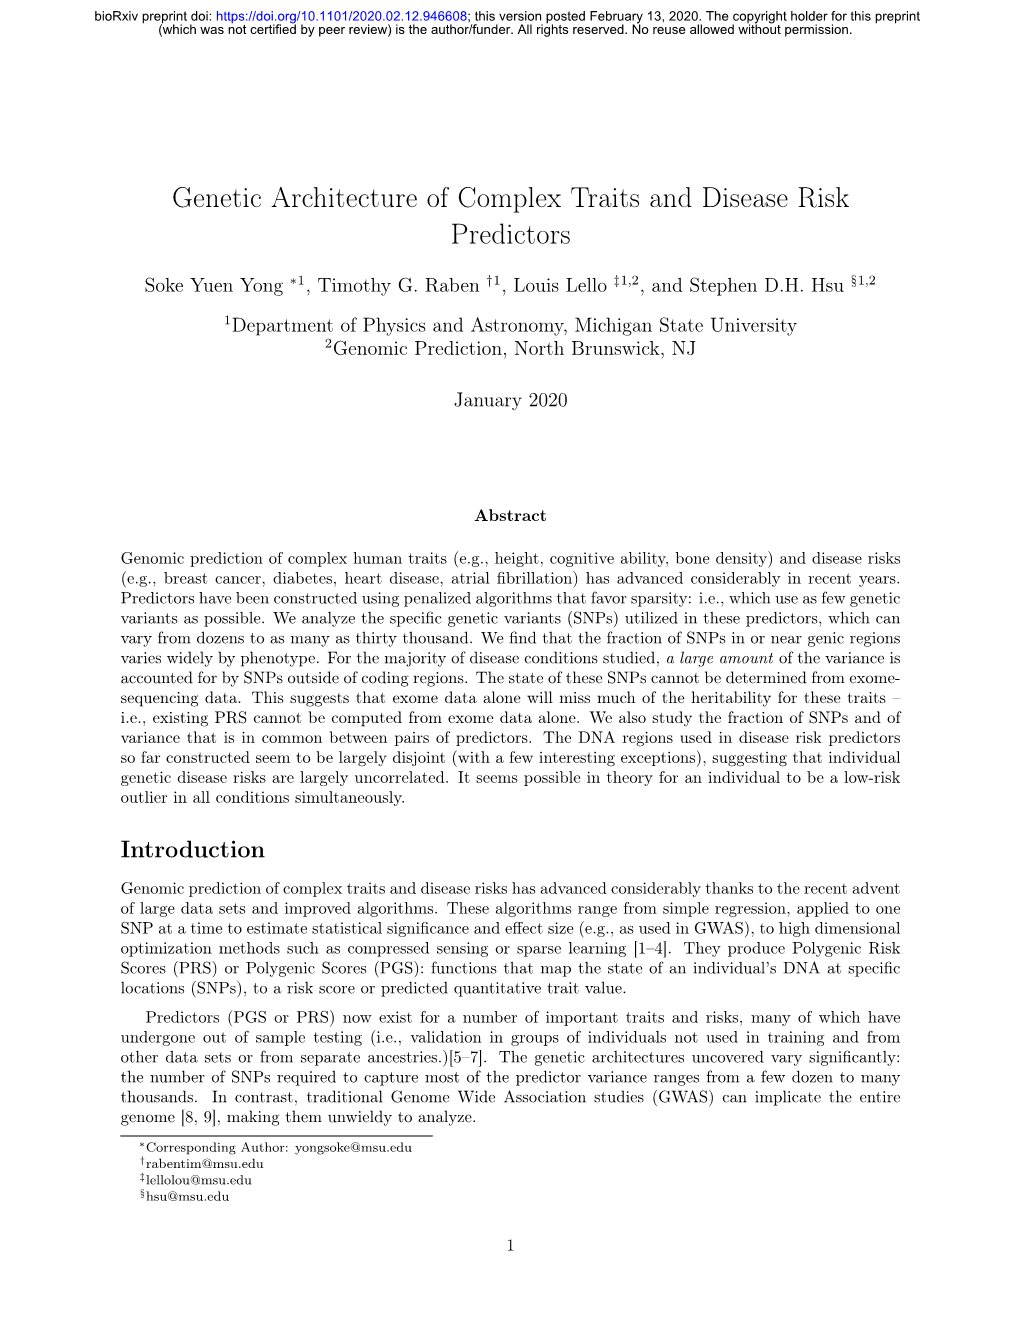 Genetic Architecture of Complex Traits and Disease Risk Predictors